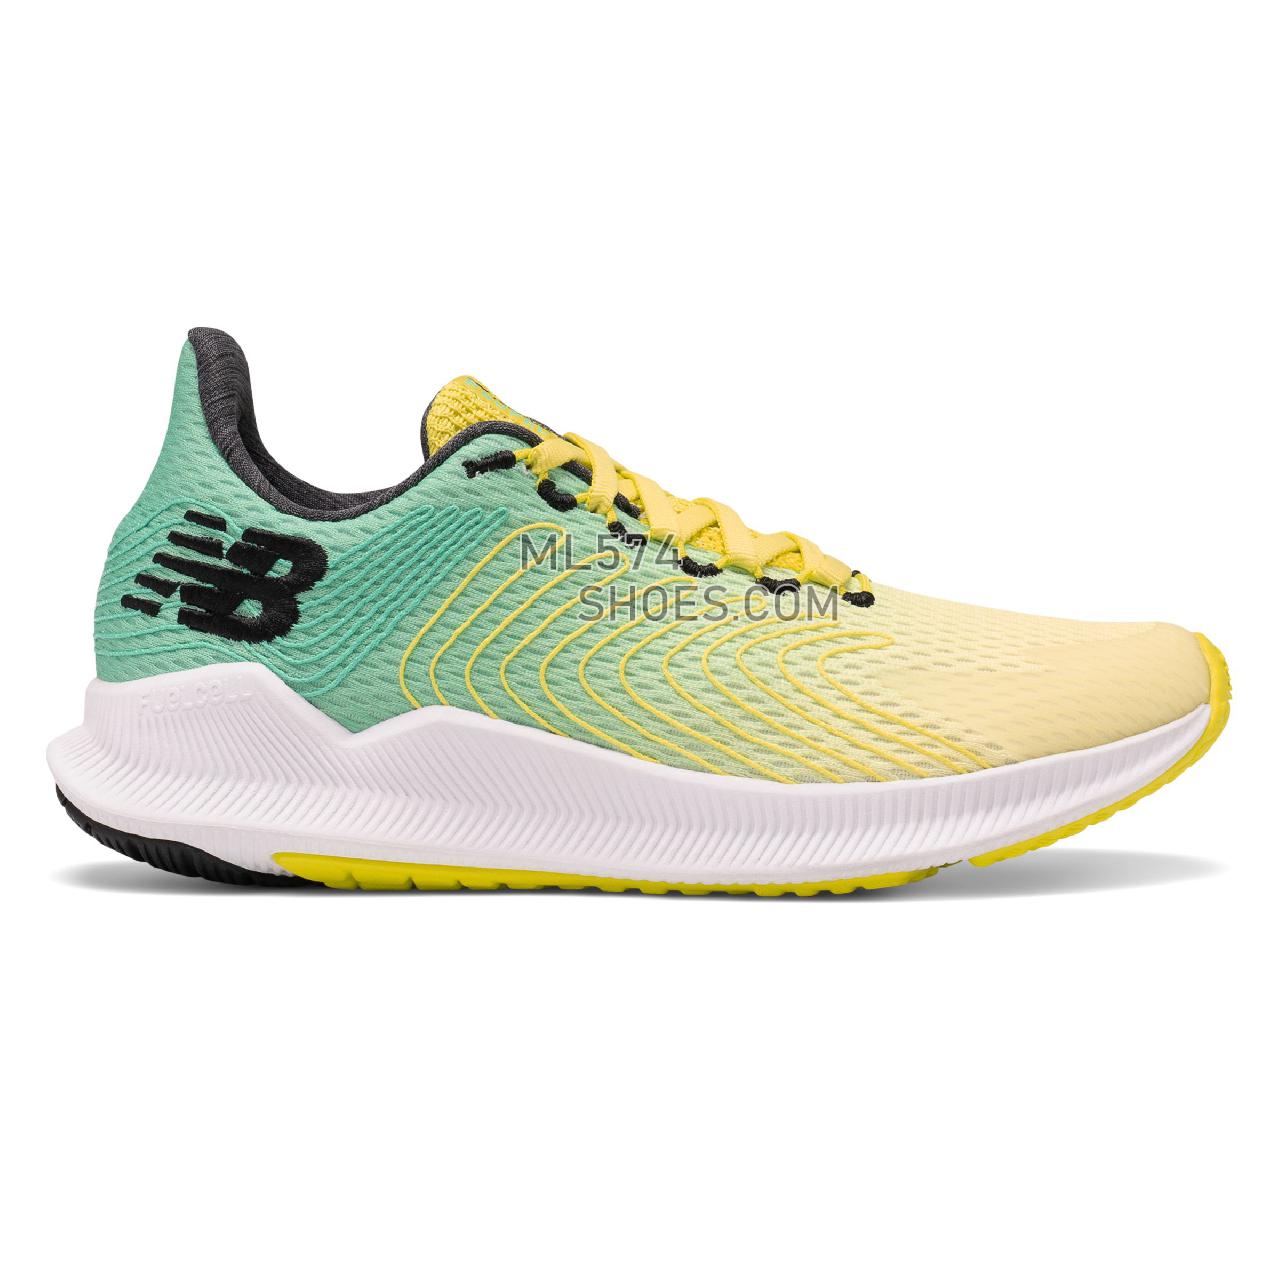 New Balance FuelCell Propel - Women's Neutral Running - Sulphur Yellow with Neon Emerald and Black - WFCPRBS1